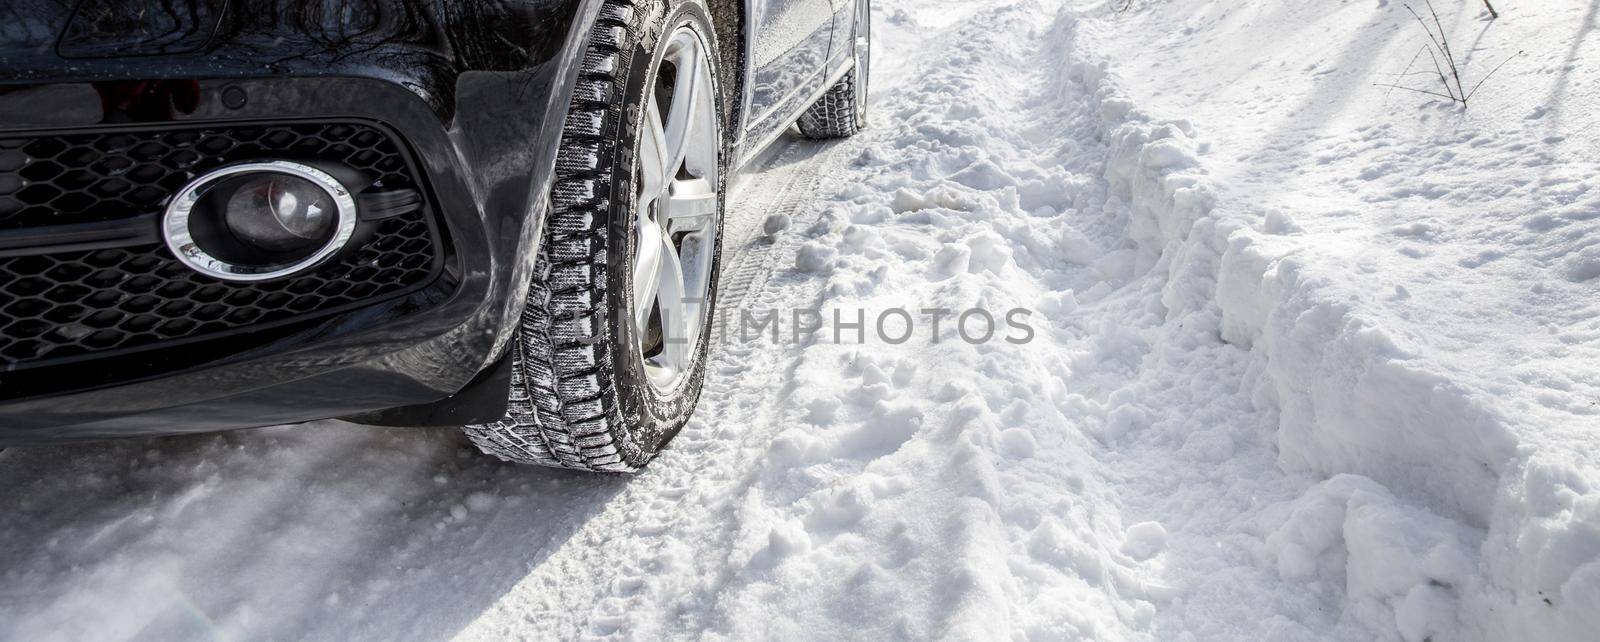 Driving SUV car in winter on forest road with much snow